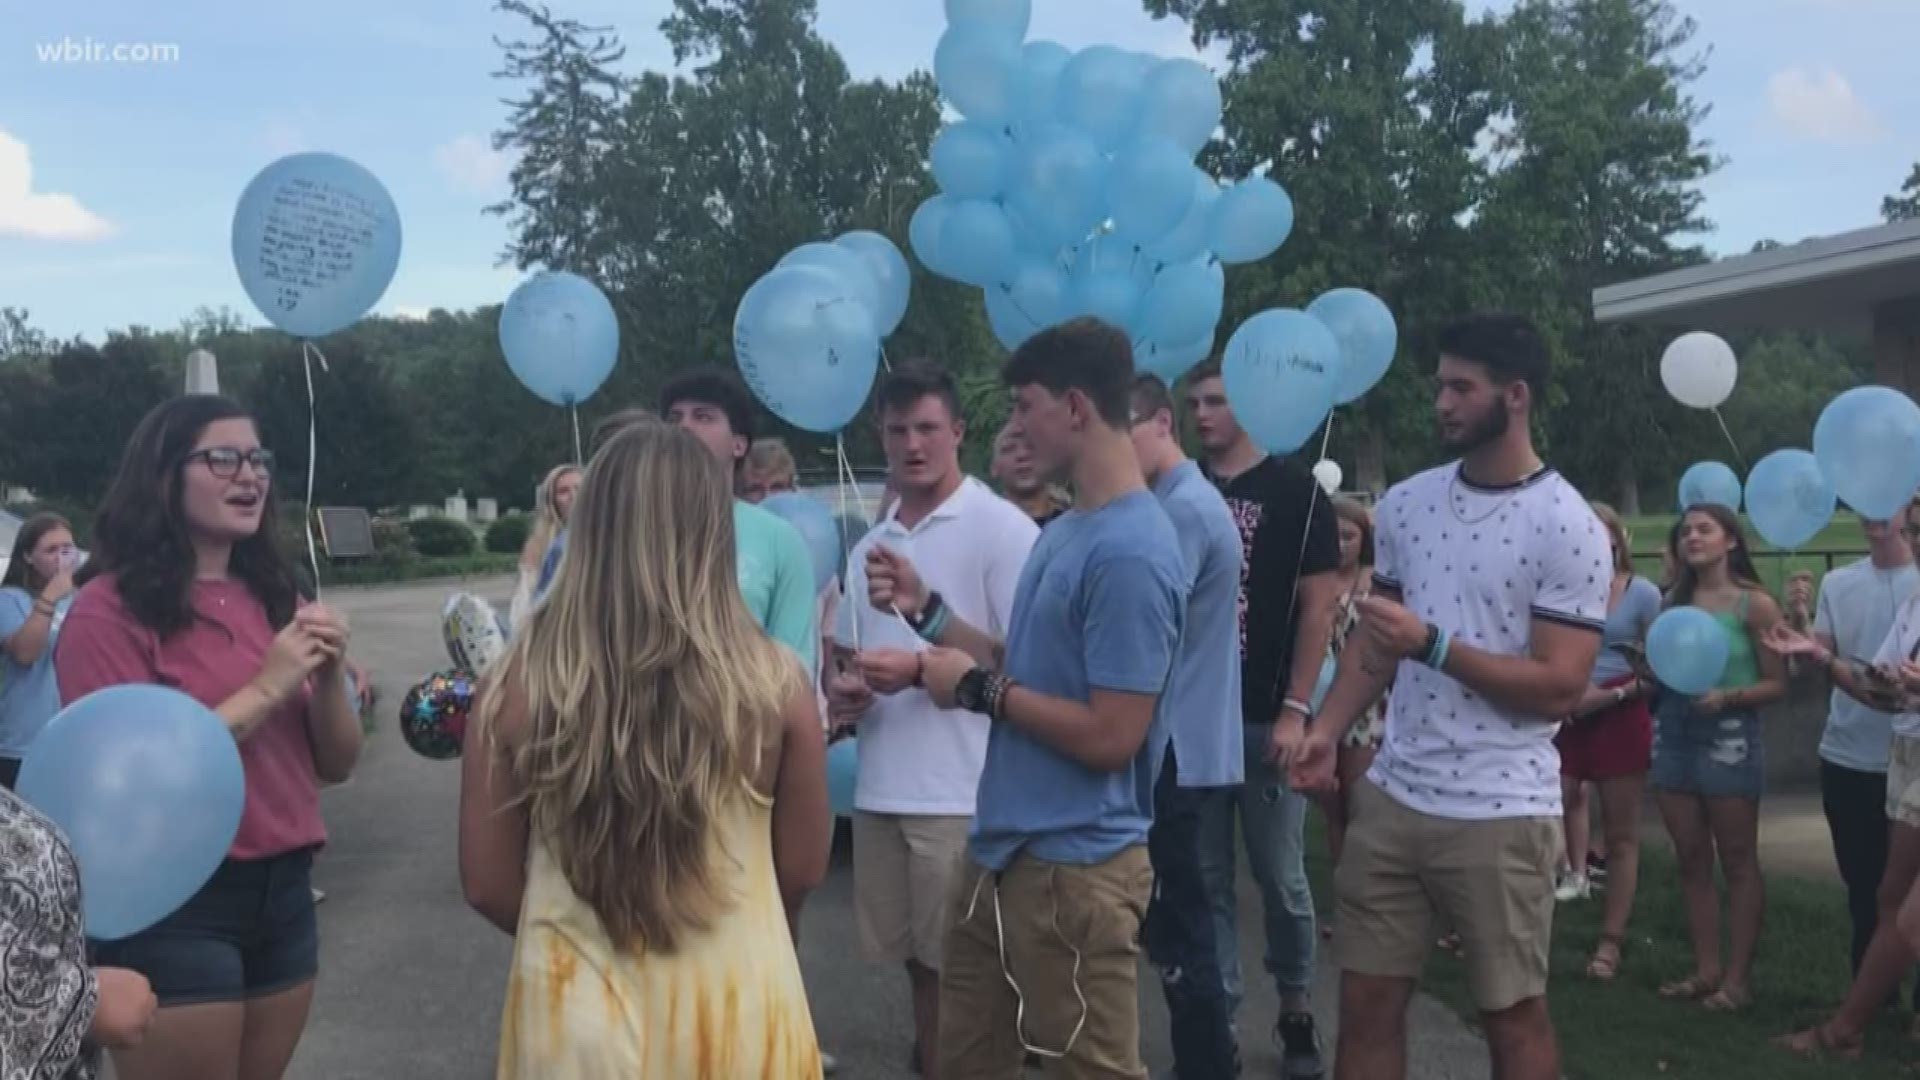 Family and friends remembered Zack Munday on what would have been his 16th birthday. Munday, a 15-year-old Gibbs student, died back in May.